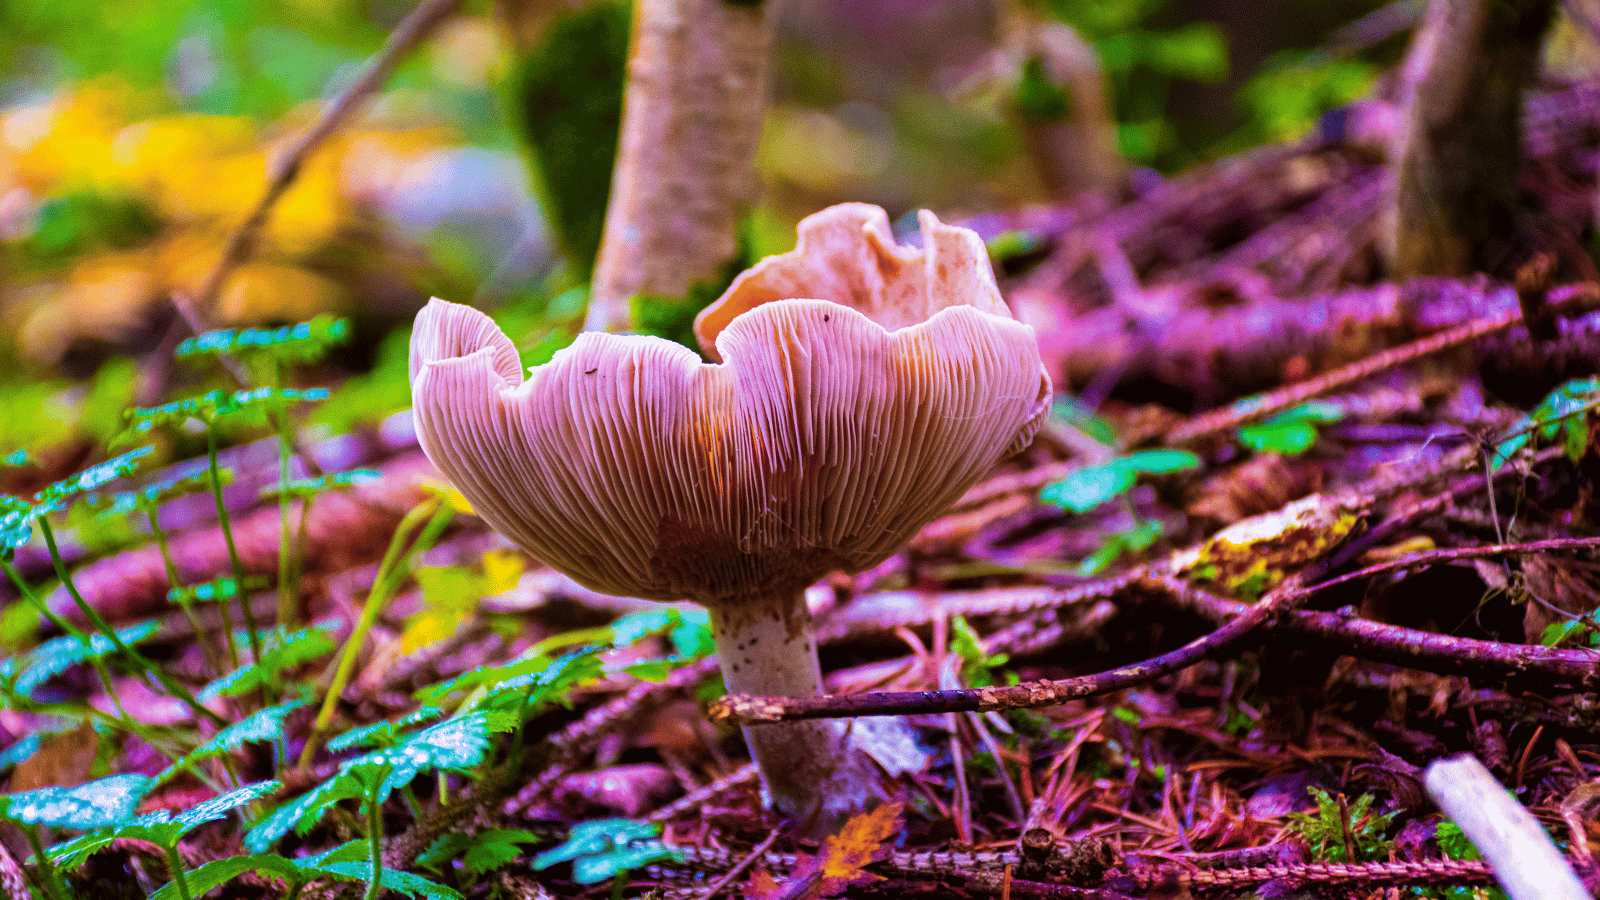 Non-Nootropic Functional Mushrooms And Their Benefits